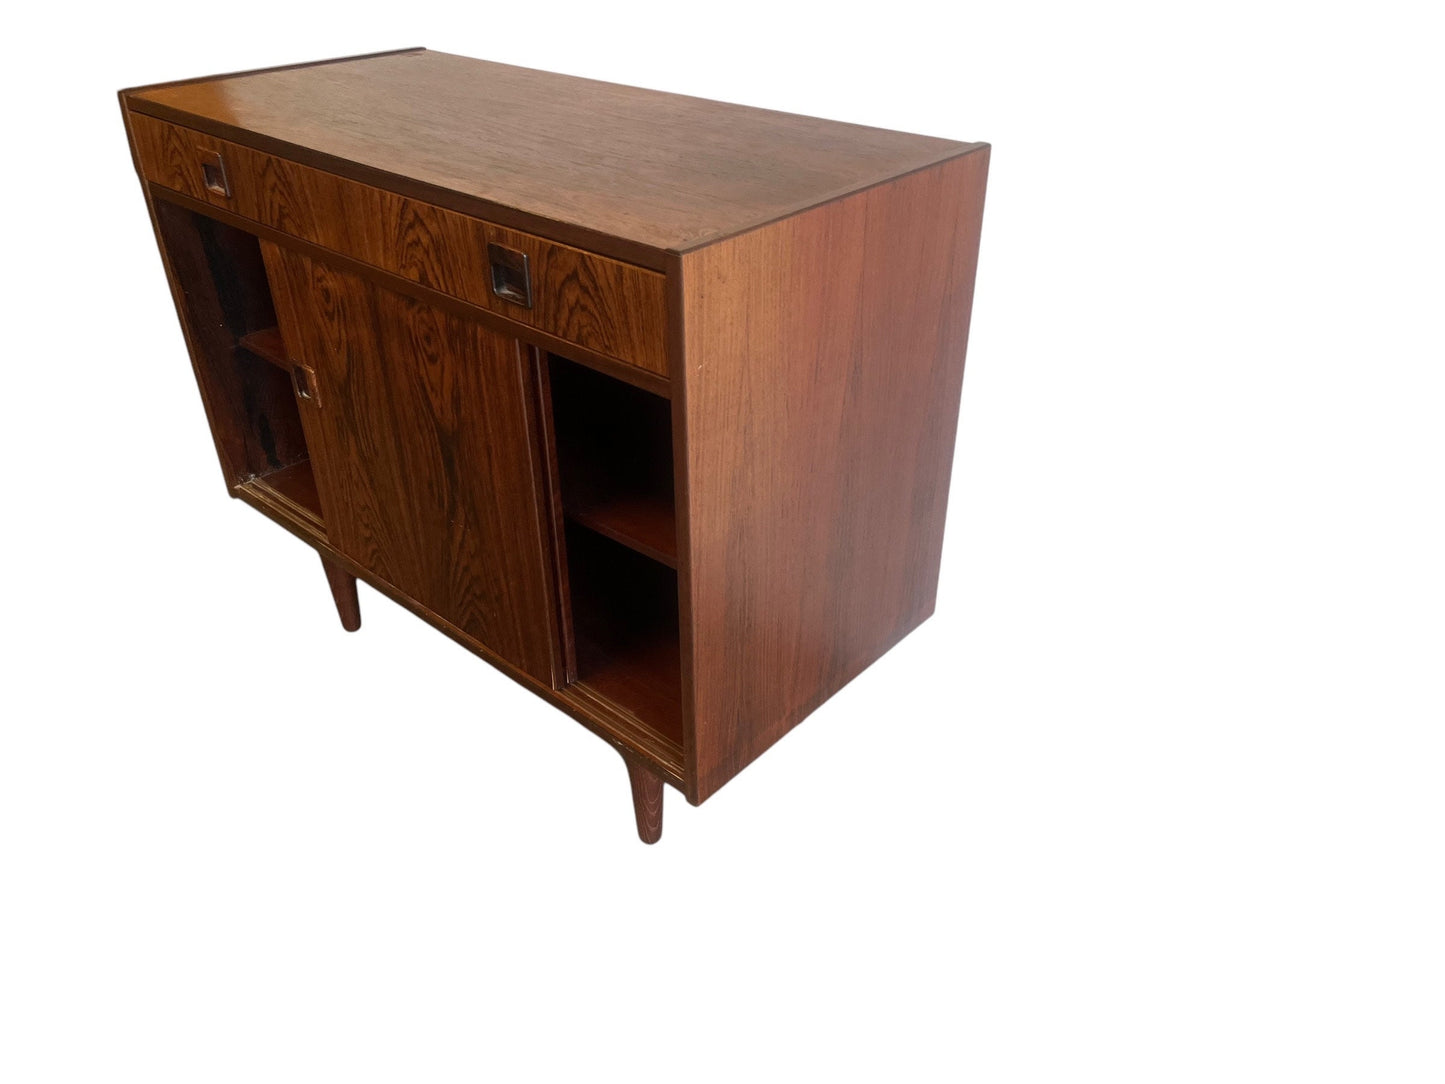 Mid-Century Modern rosewood sidboard console 1960's